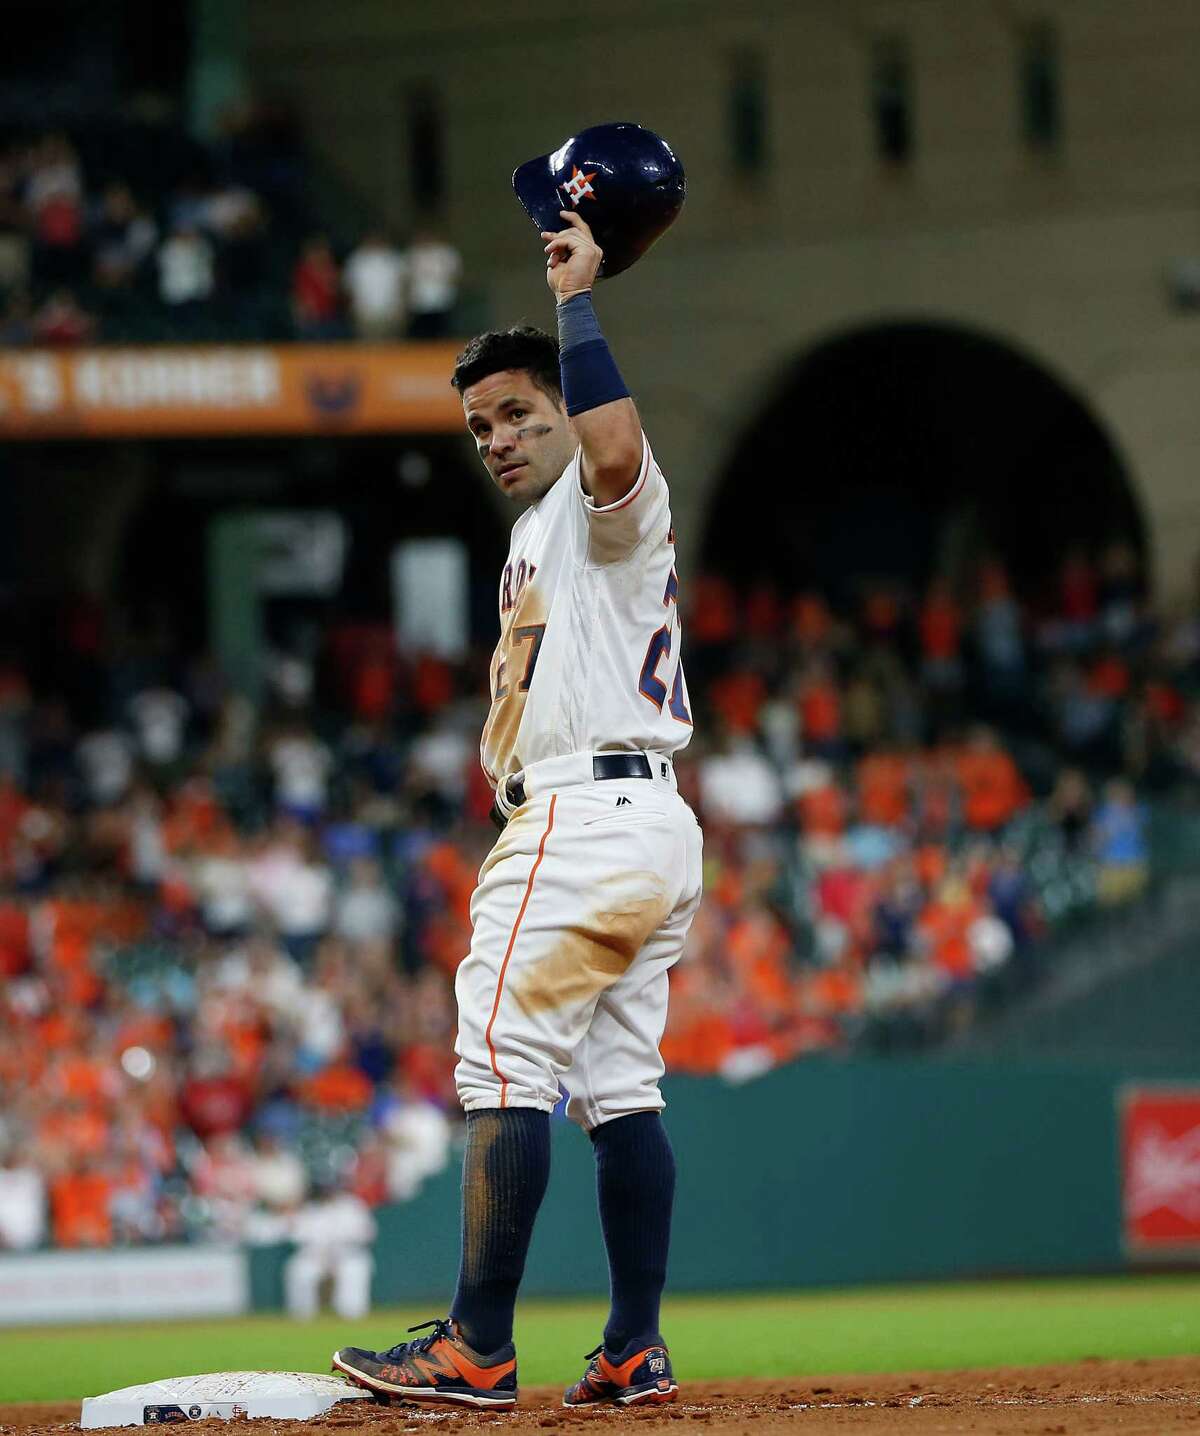 En route to winning the AL batting title with a .338 average, Jose Altuve celebrated his 1,000th career hit in an August game at Minute Maid Park.